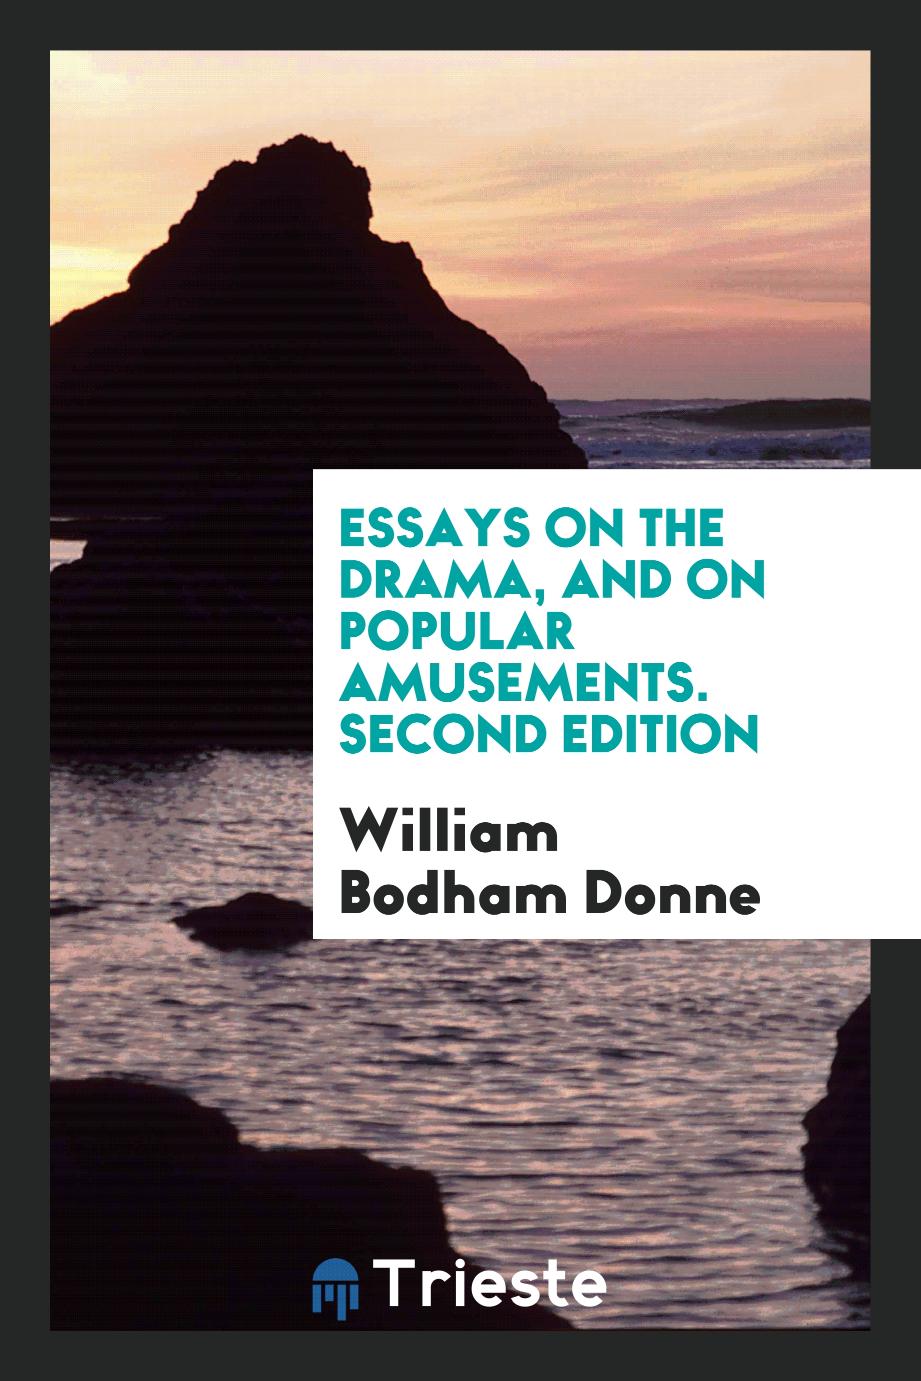 William Bodham Donne - Essays on the Drama, and on Popular Amusements. Second Edition